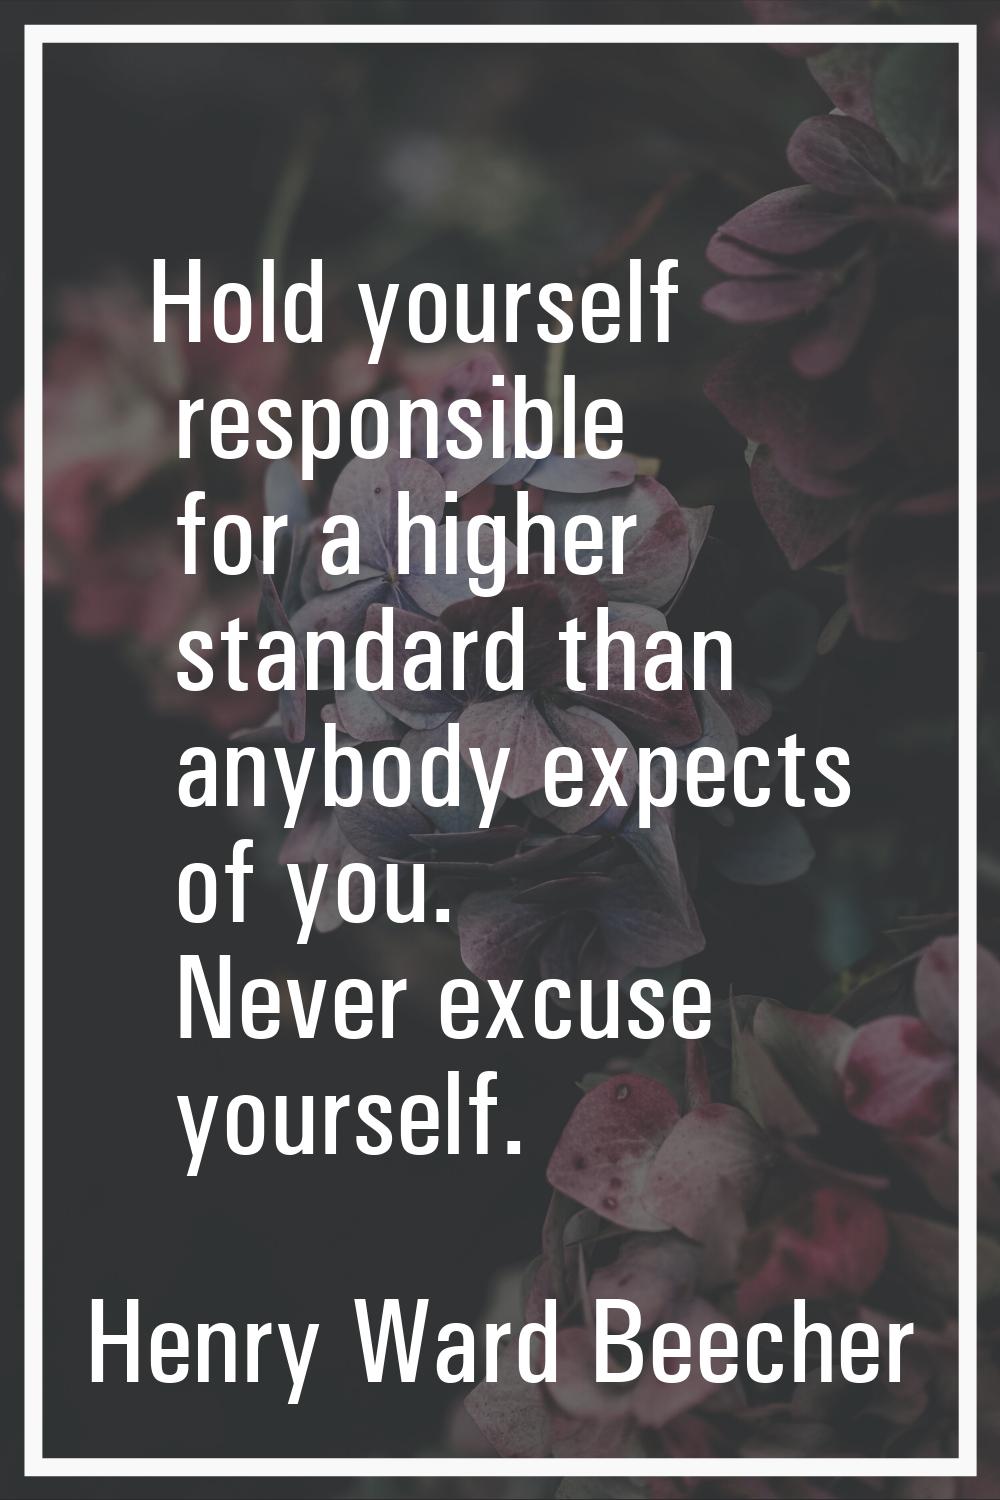 Hold yourself responsible for a higher standard than anybody expects of you. Never excuse yourself.